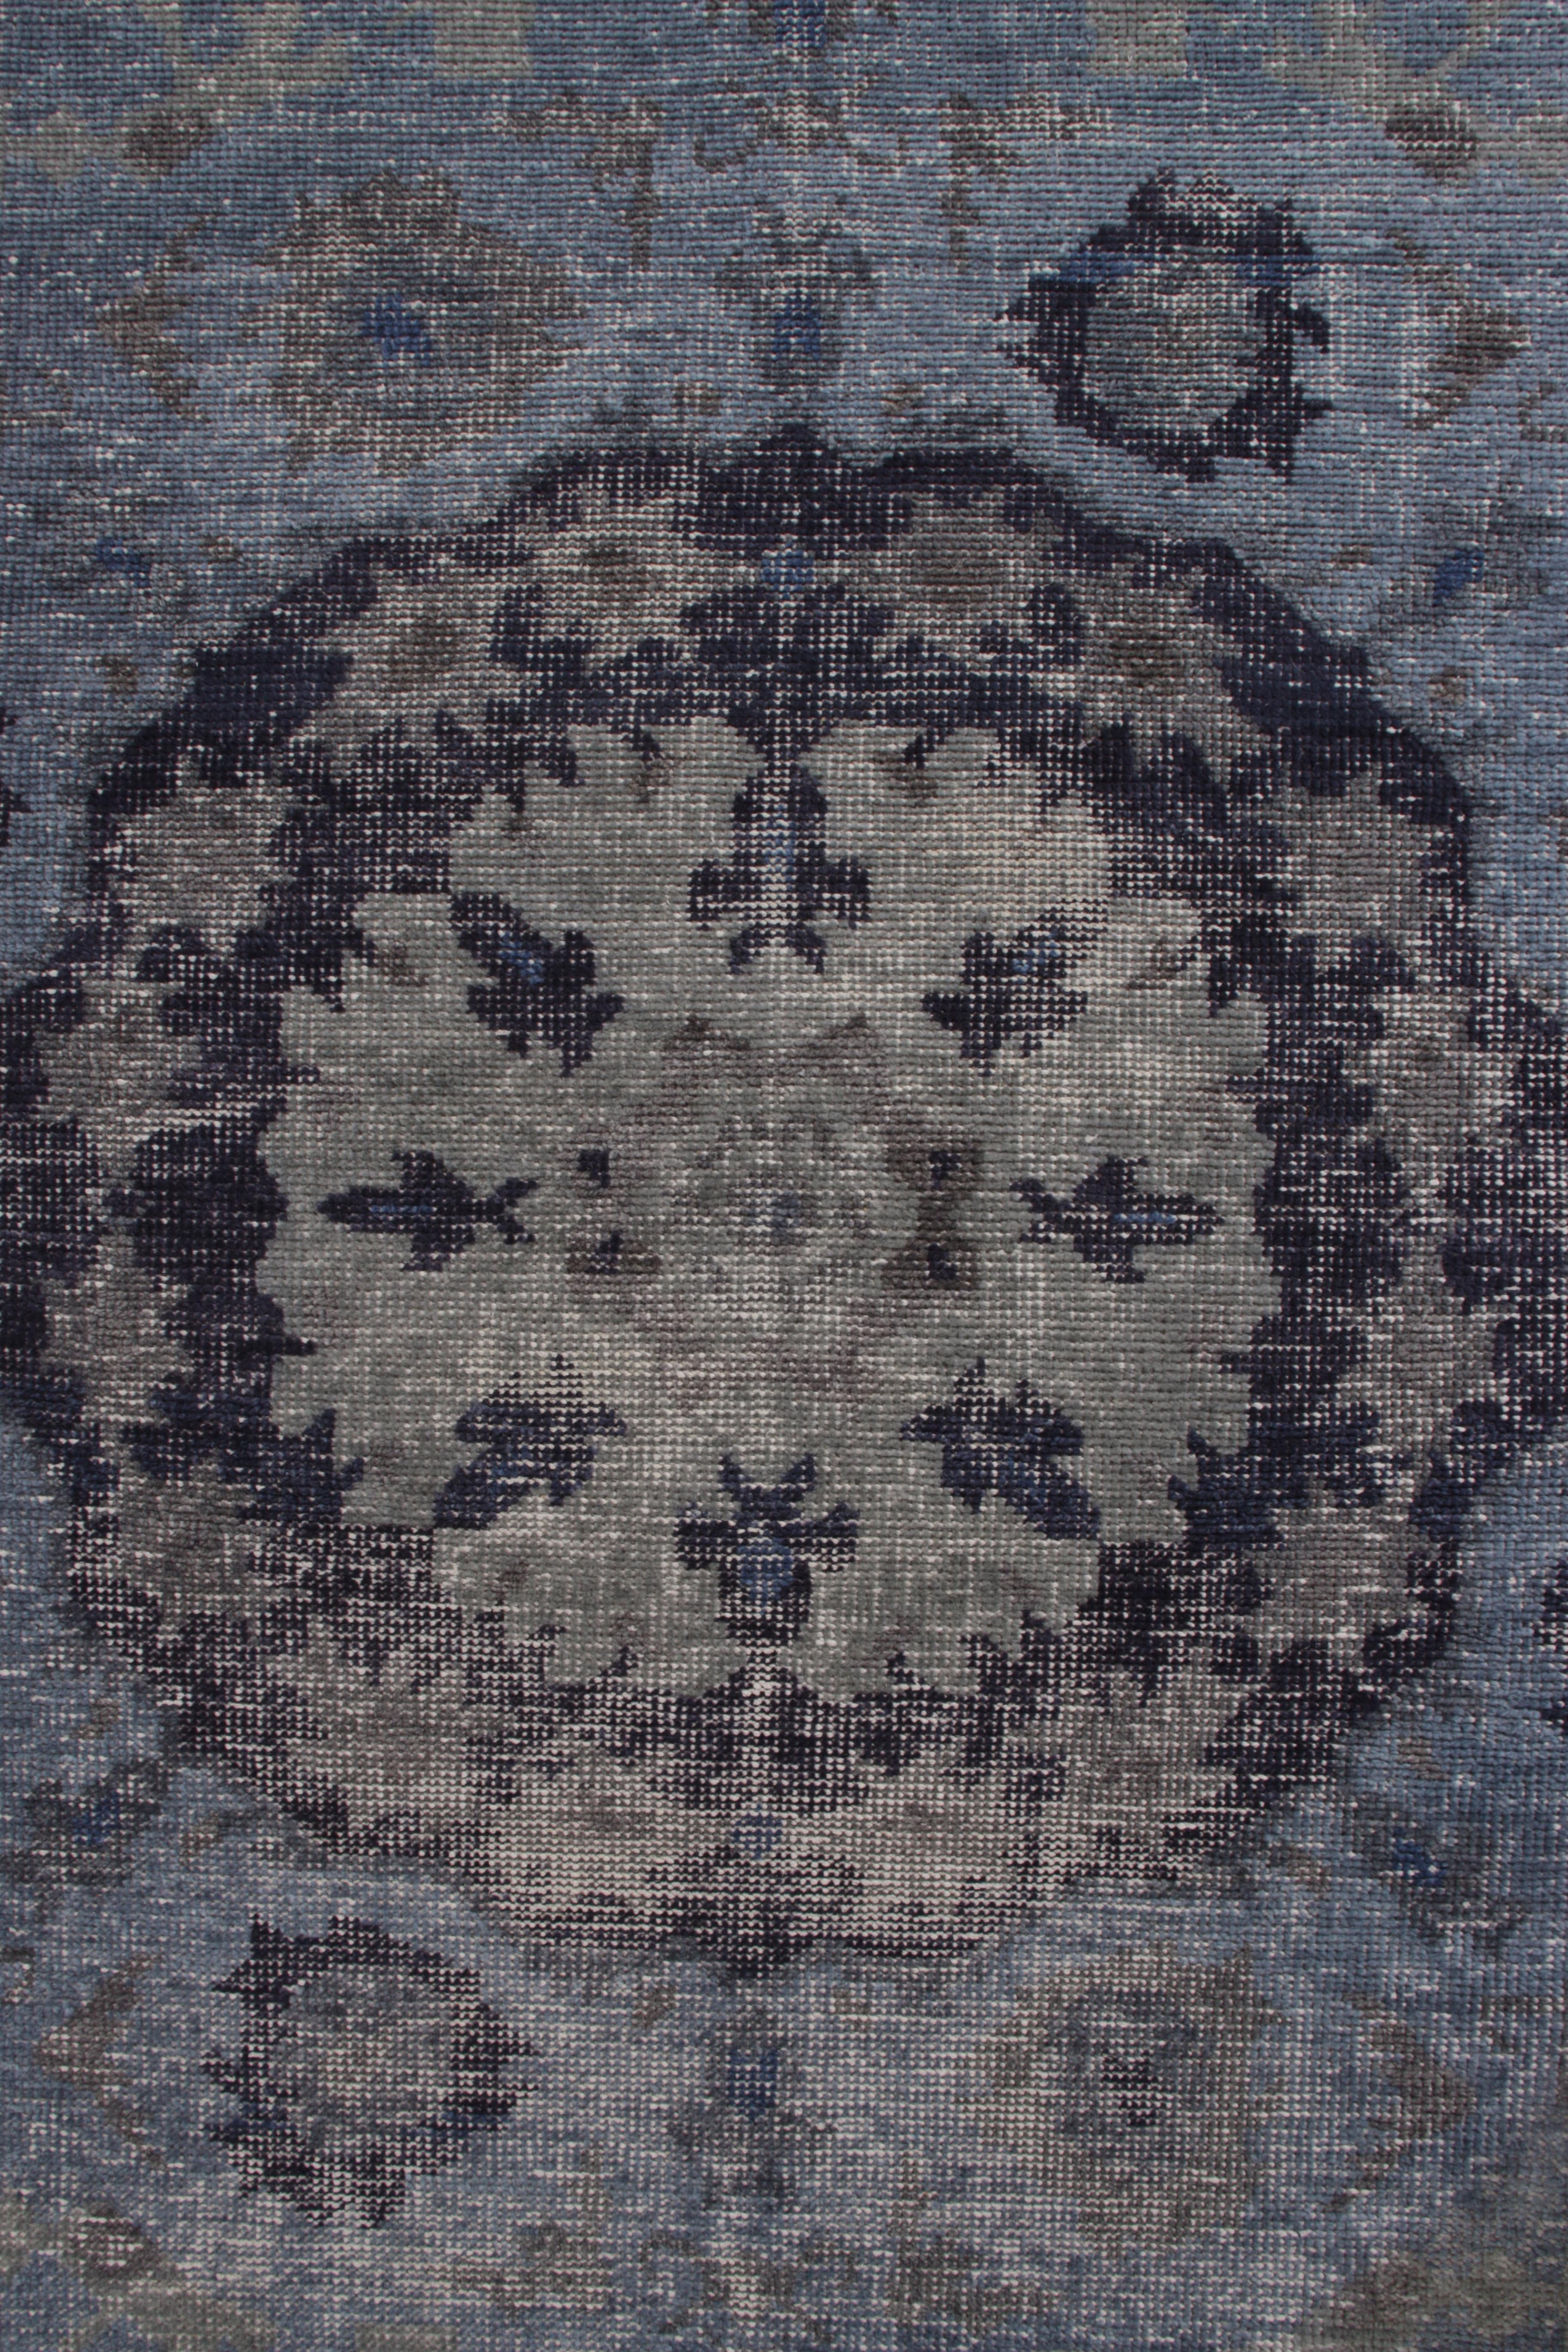 Indian Rug & Kilim’s Distressed Oriental Style Rug in Blue Gray Medallion Pattern For Sale